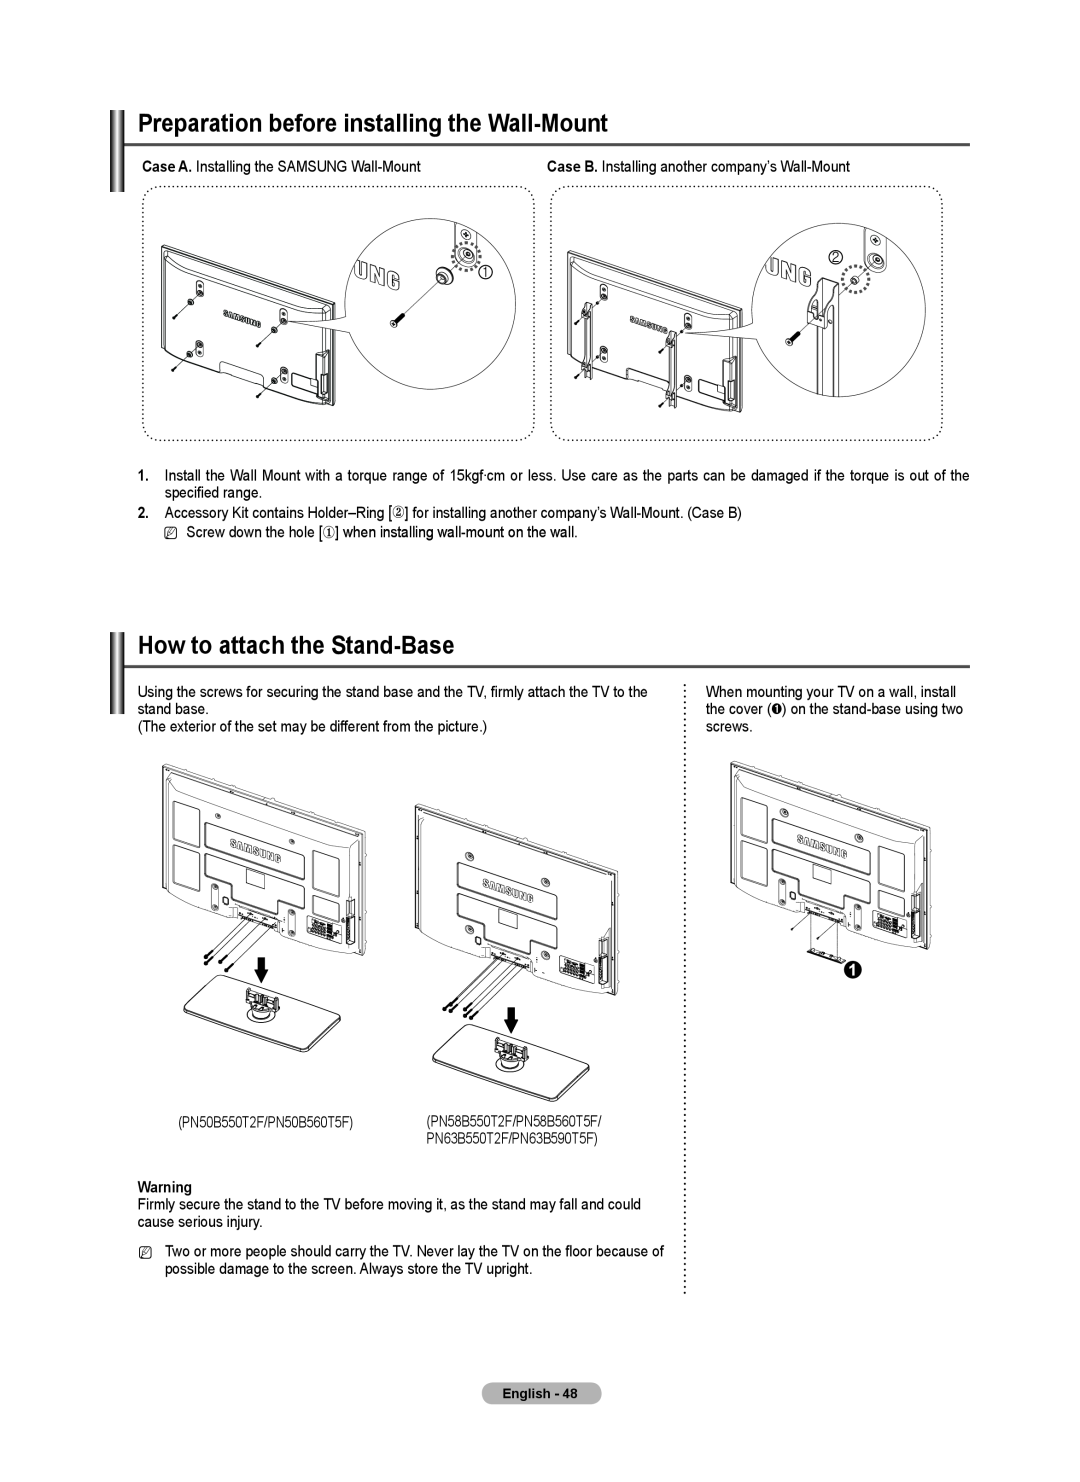 Samsung BN68-02221B-00, PN50B550TF, PN6B590T5F Preparation before installing the Wall-Mount, How to attach the Stand-Base 